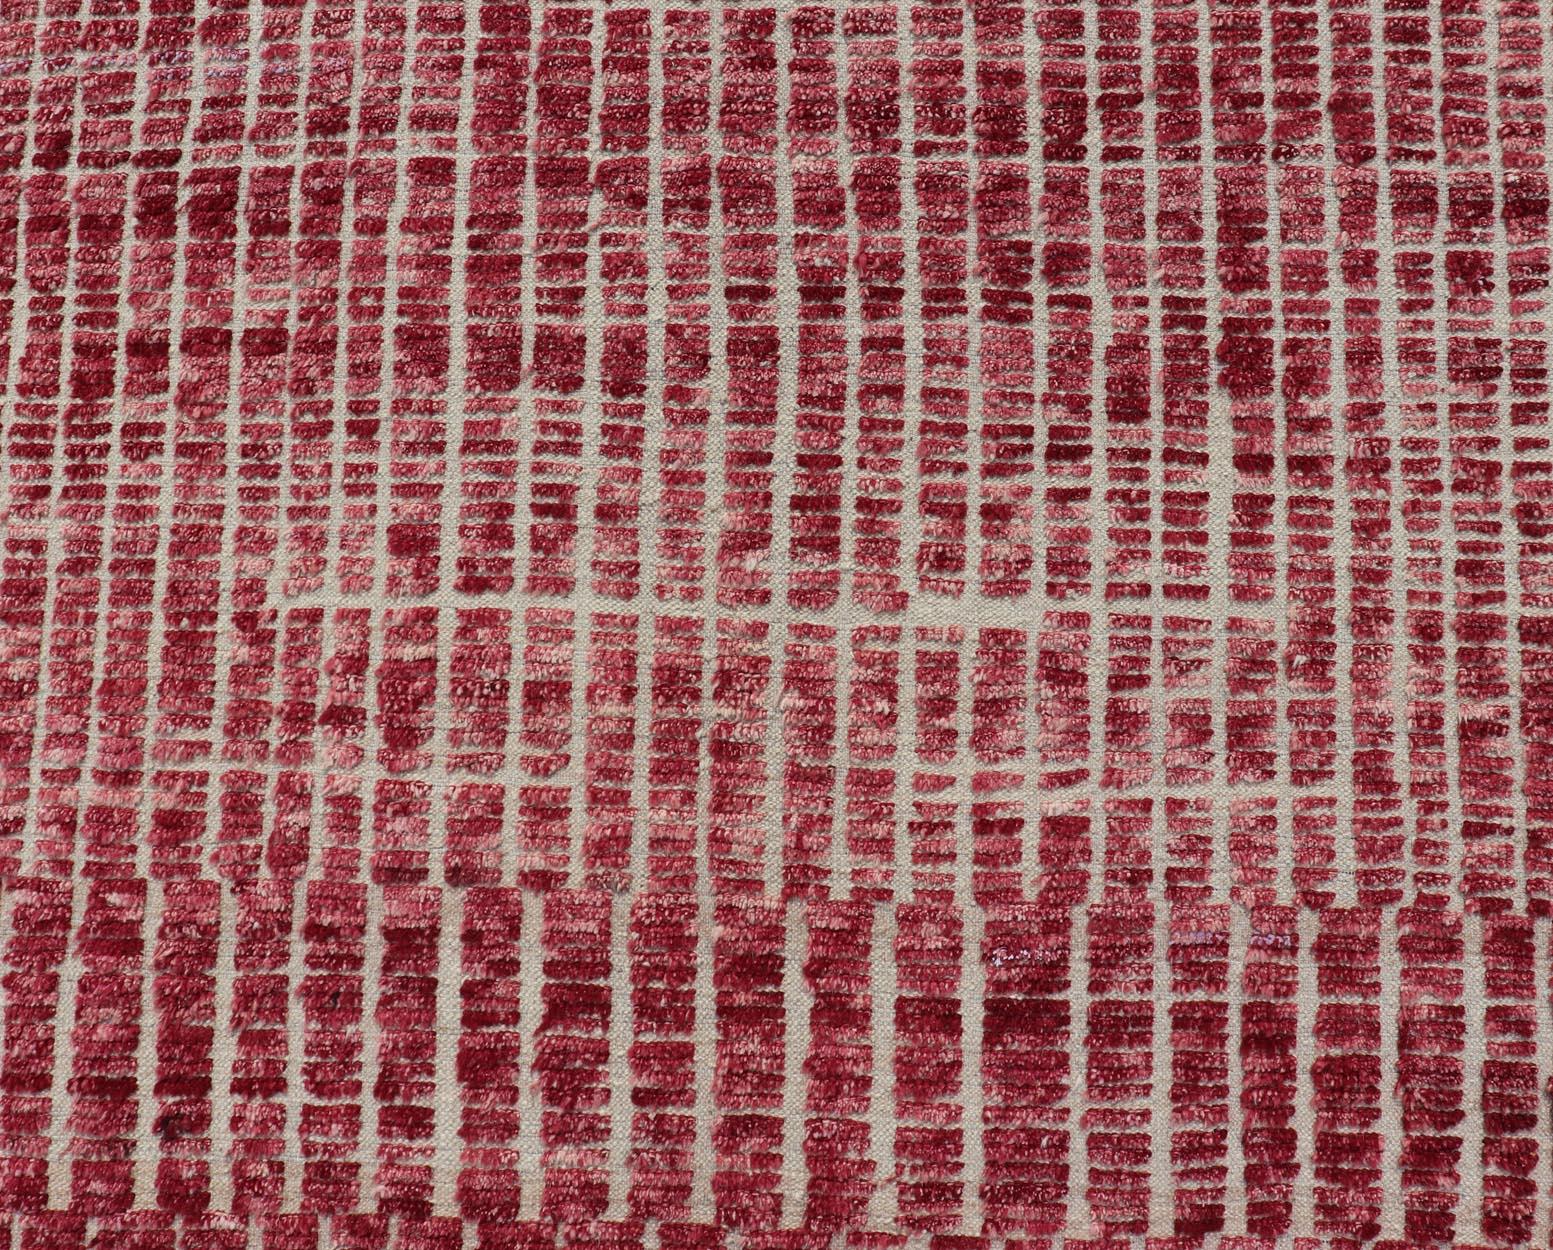 This modern casual tribal Moroccan rug has been hand-knotted in wool. The rug features a modern geometric linear design, replete with a raspberry-red hue; making this rug a superb fit for a variety of Classic, modern, casual, abstract and Minimalist